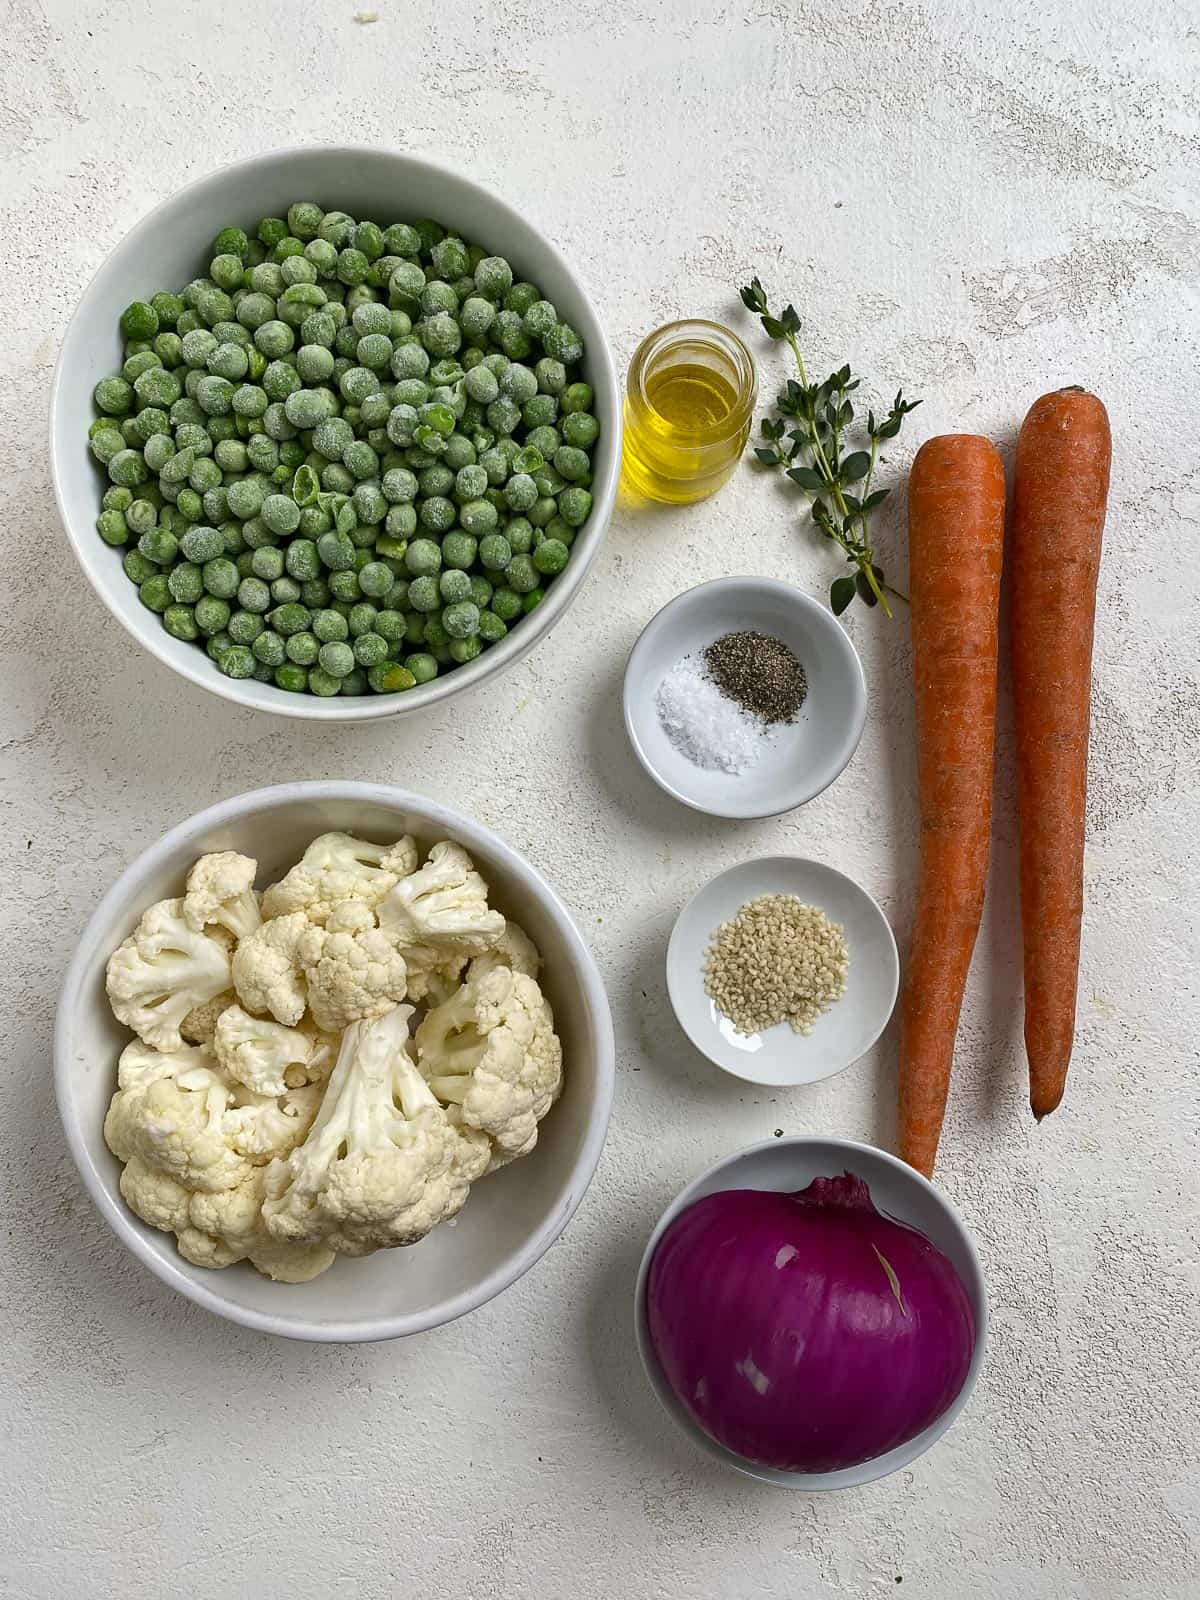 ingredients for Easy Mushy Peas with Roasted Veggies against a light background